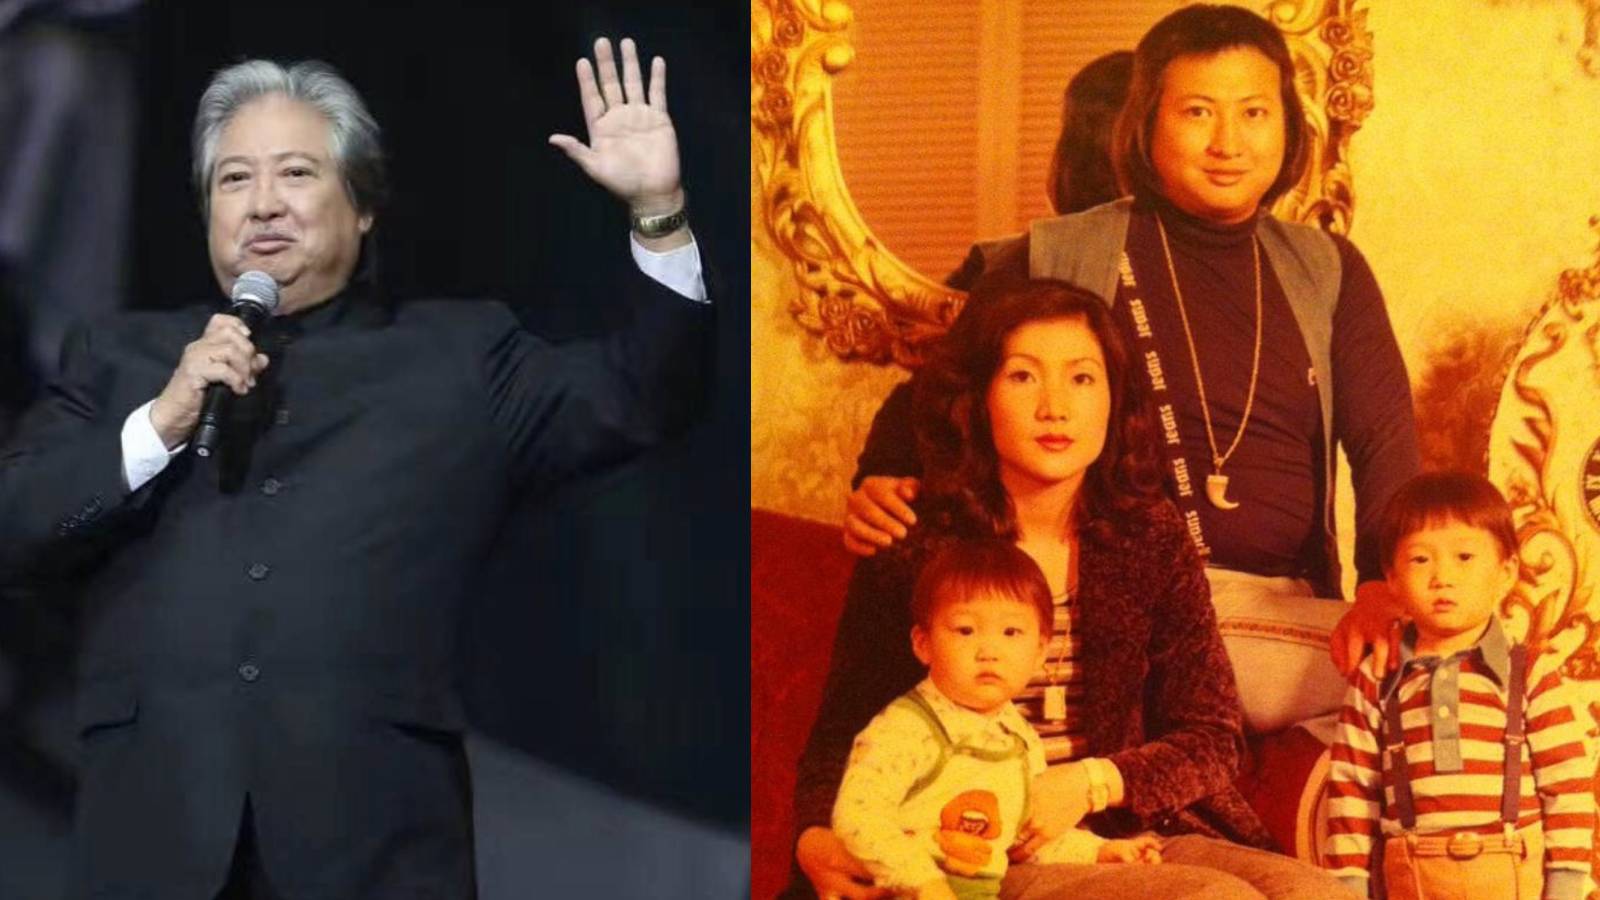 Sammo Hung Married His First Wife 'Cos A Hotel Staff Wanted "Proof" Of Their Relationship When She Was Helping Him Check In